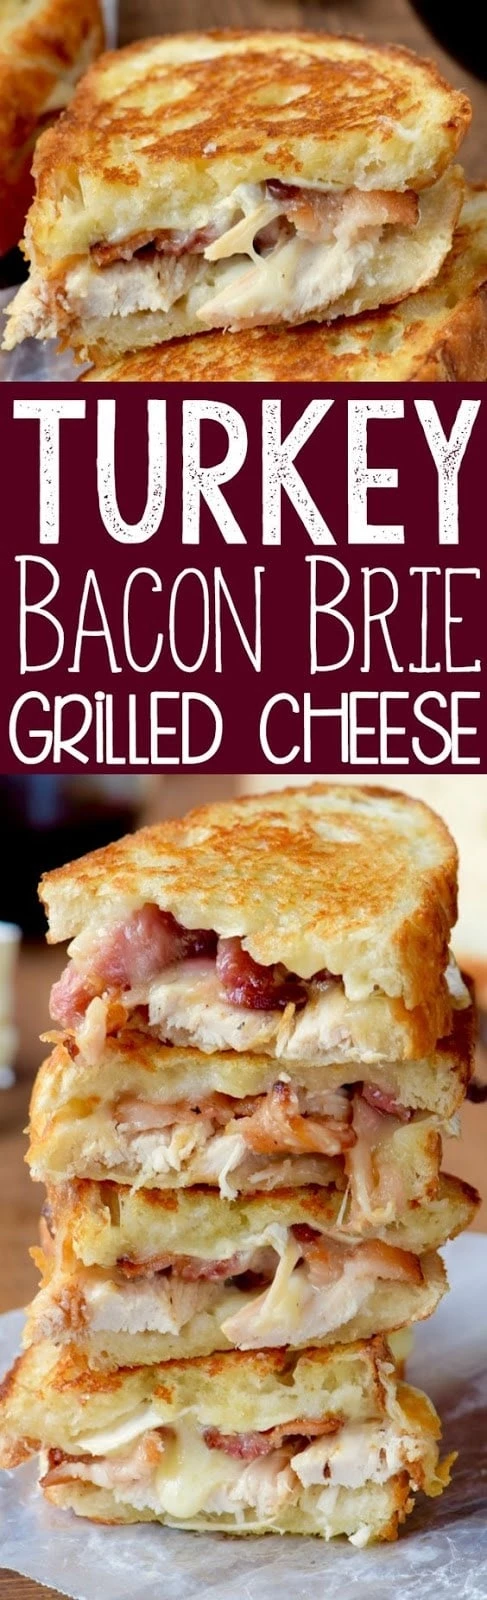 Turkey Bacon Brie Grilled Cheese